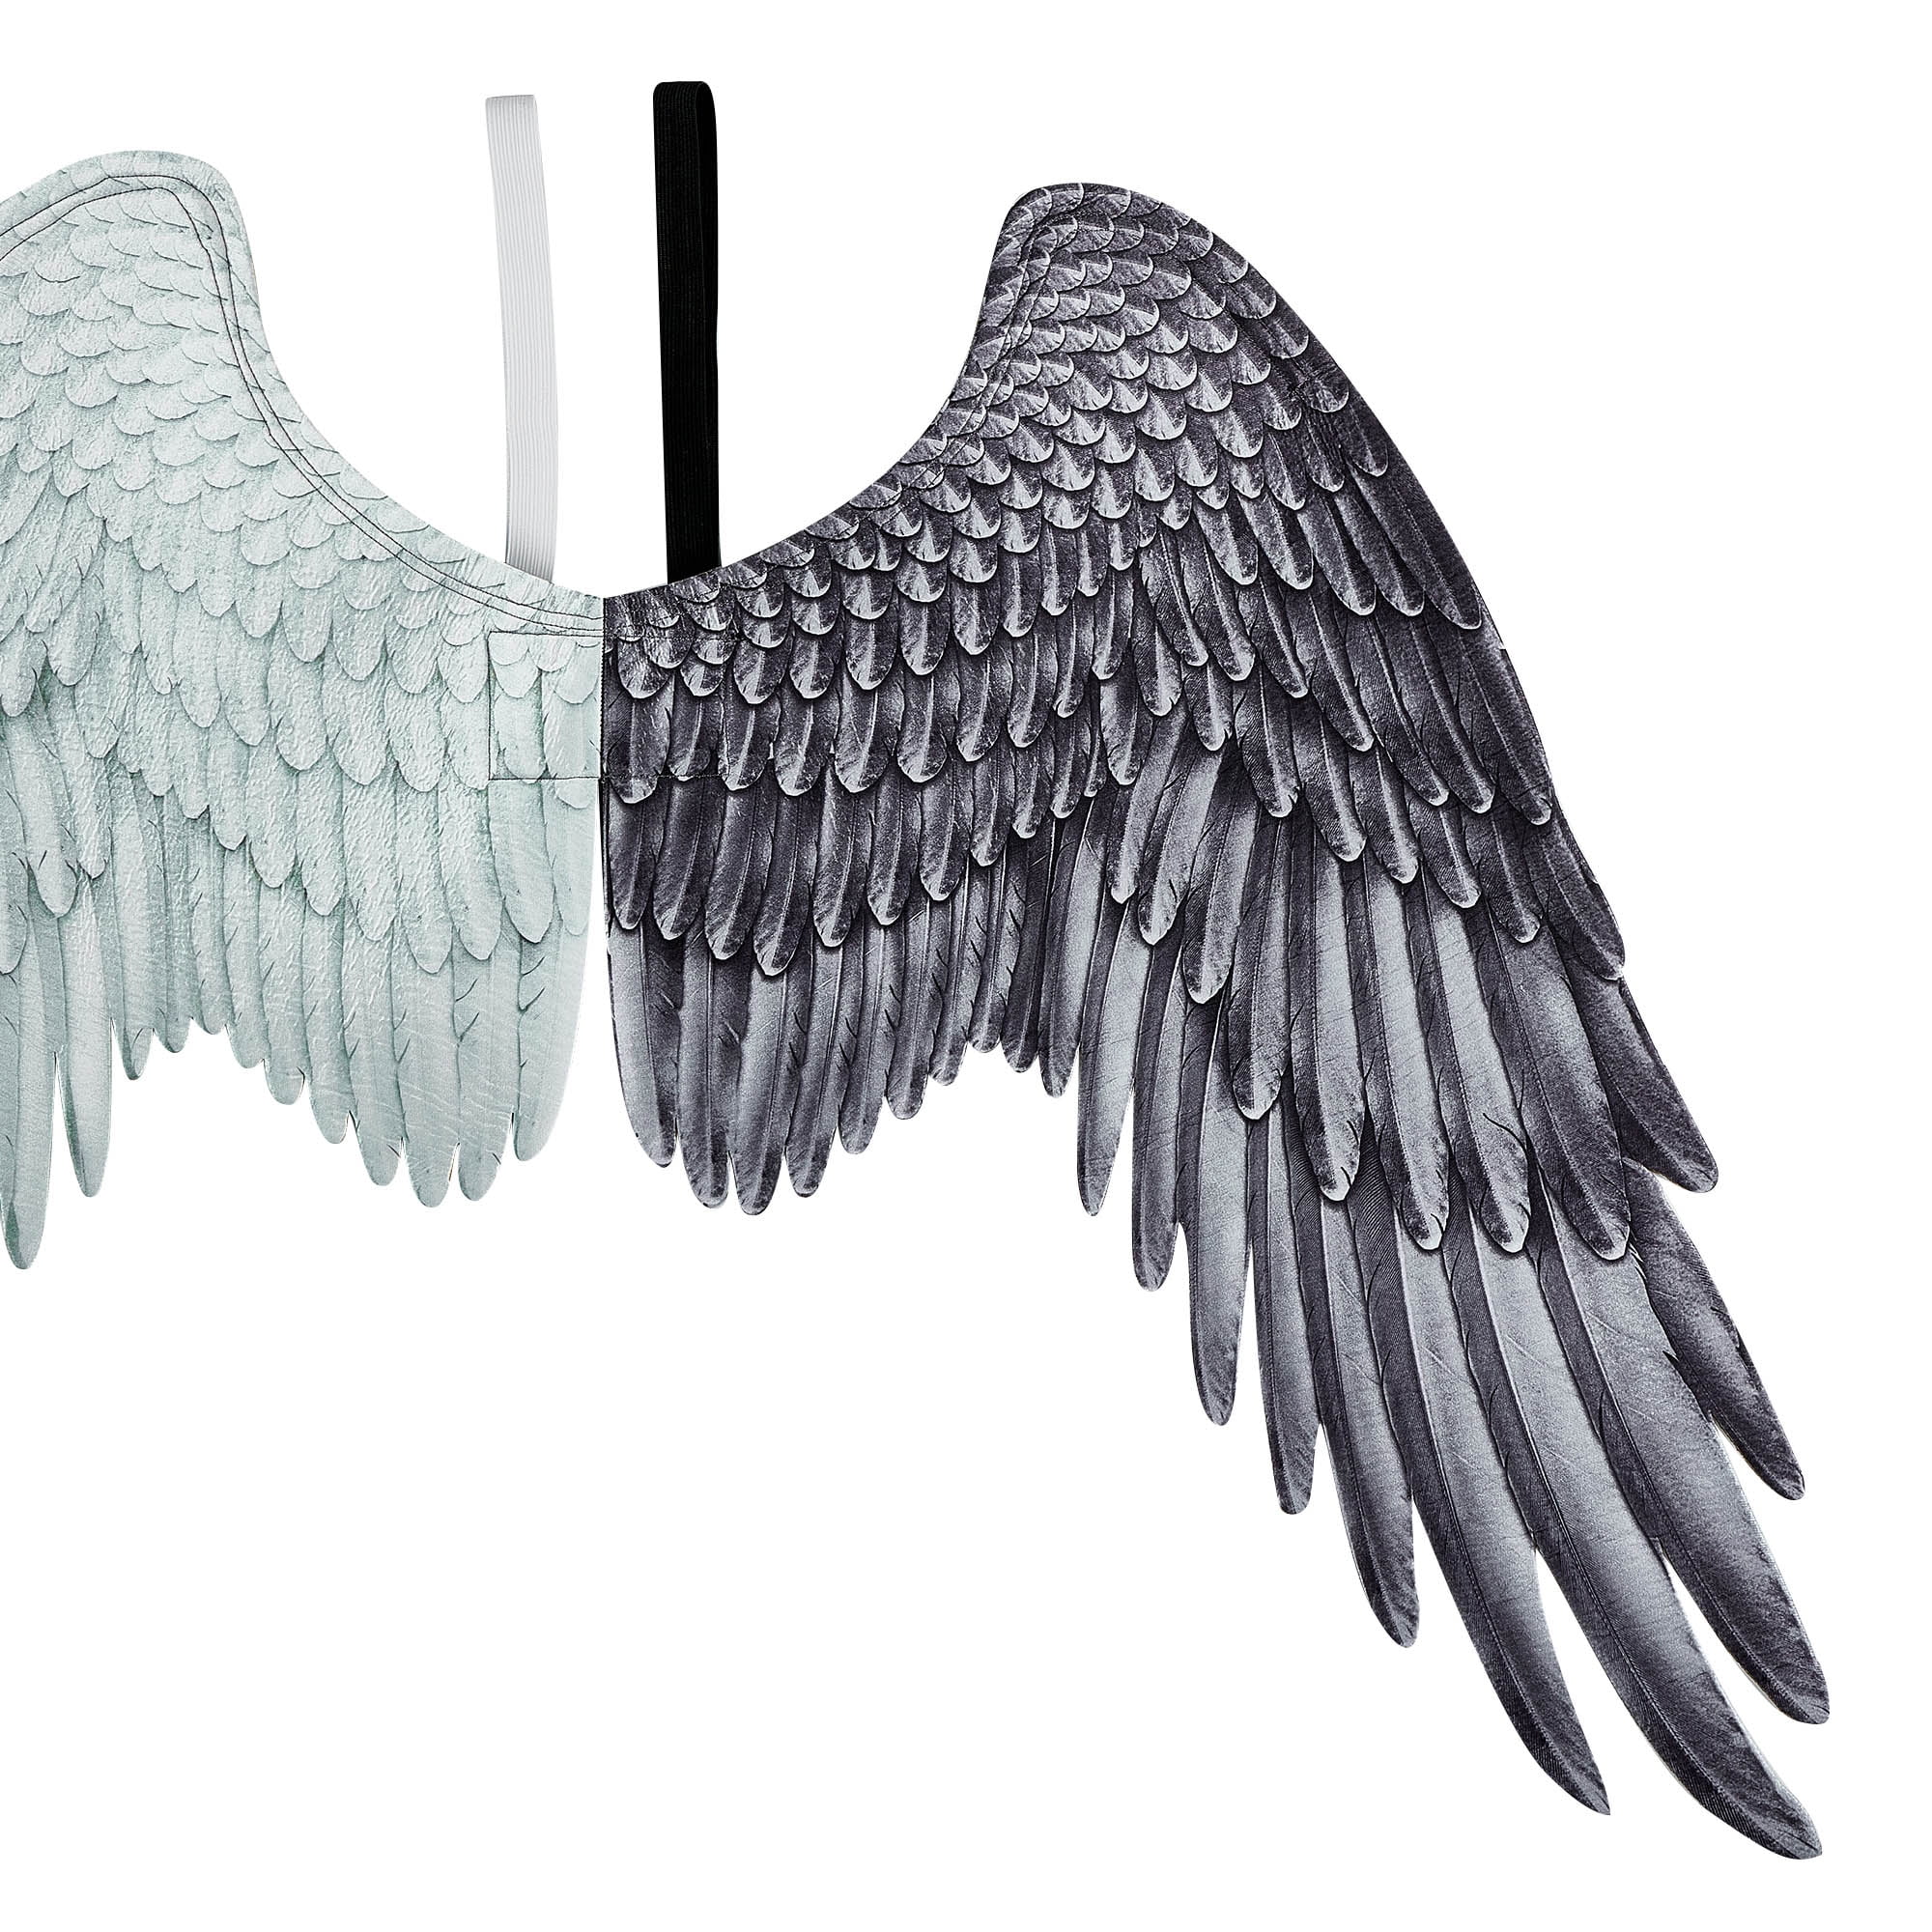 Simulation Angel Feather Wings With Back Decoration For Children's